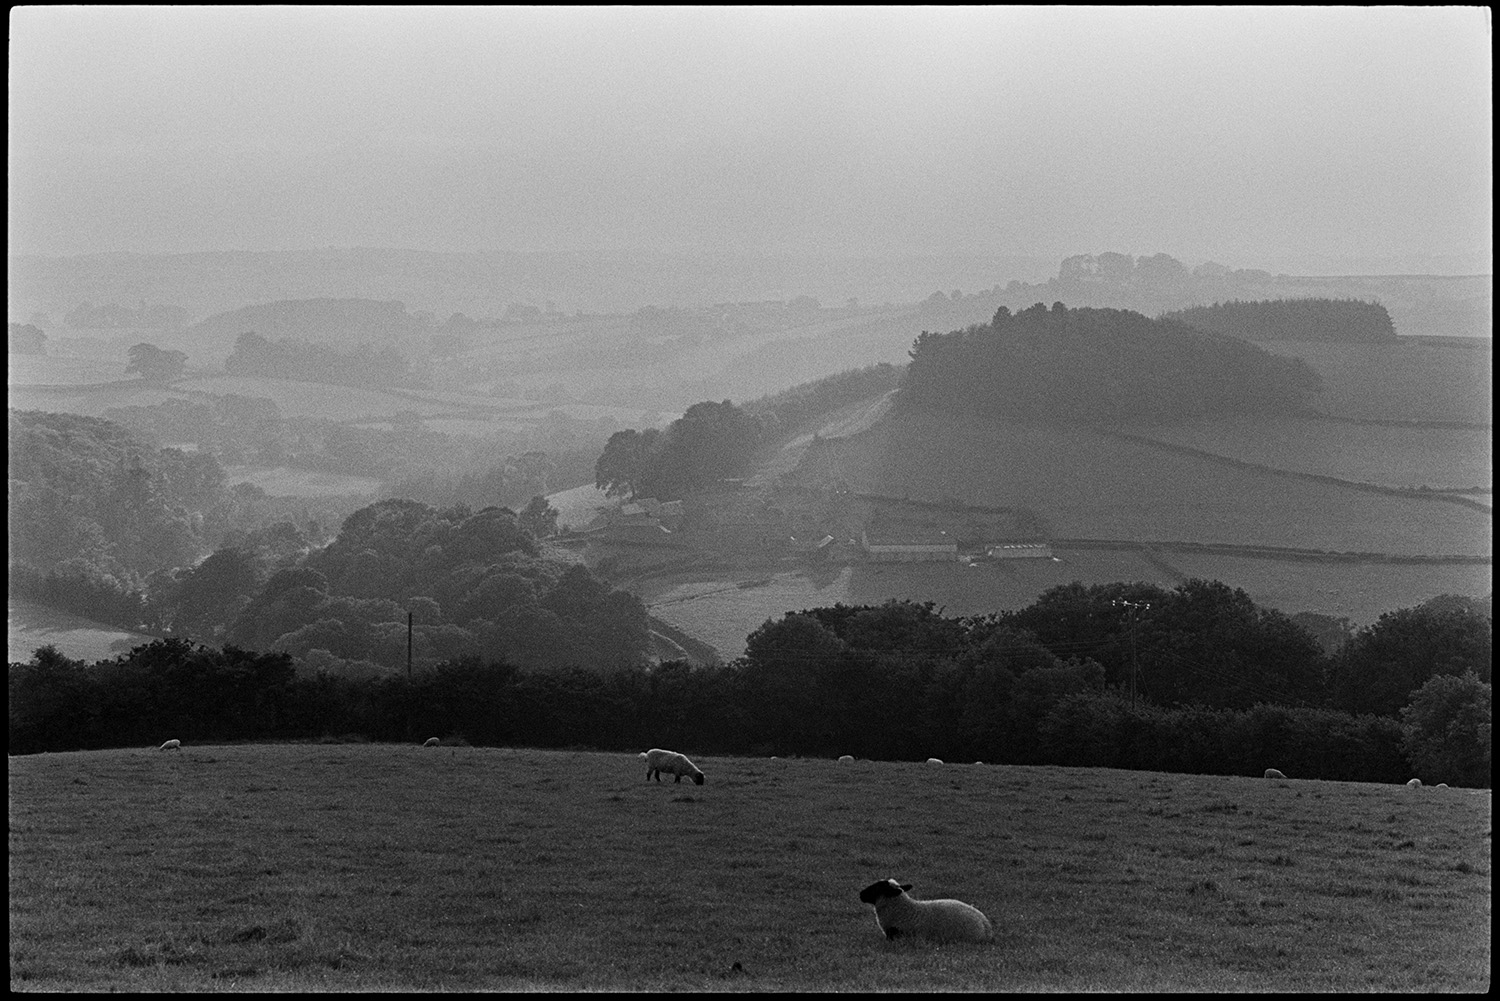 Sheep and cows in landscape. 
[Sheep grazing in a field at Ashwell, Dolton. A misty landscape with fields, woodland and farm buildings can be seen in the background.]